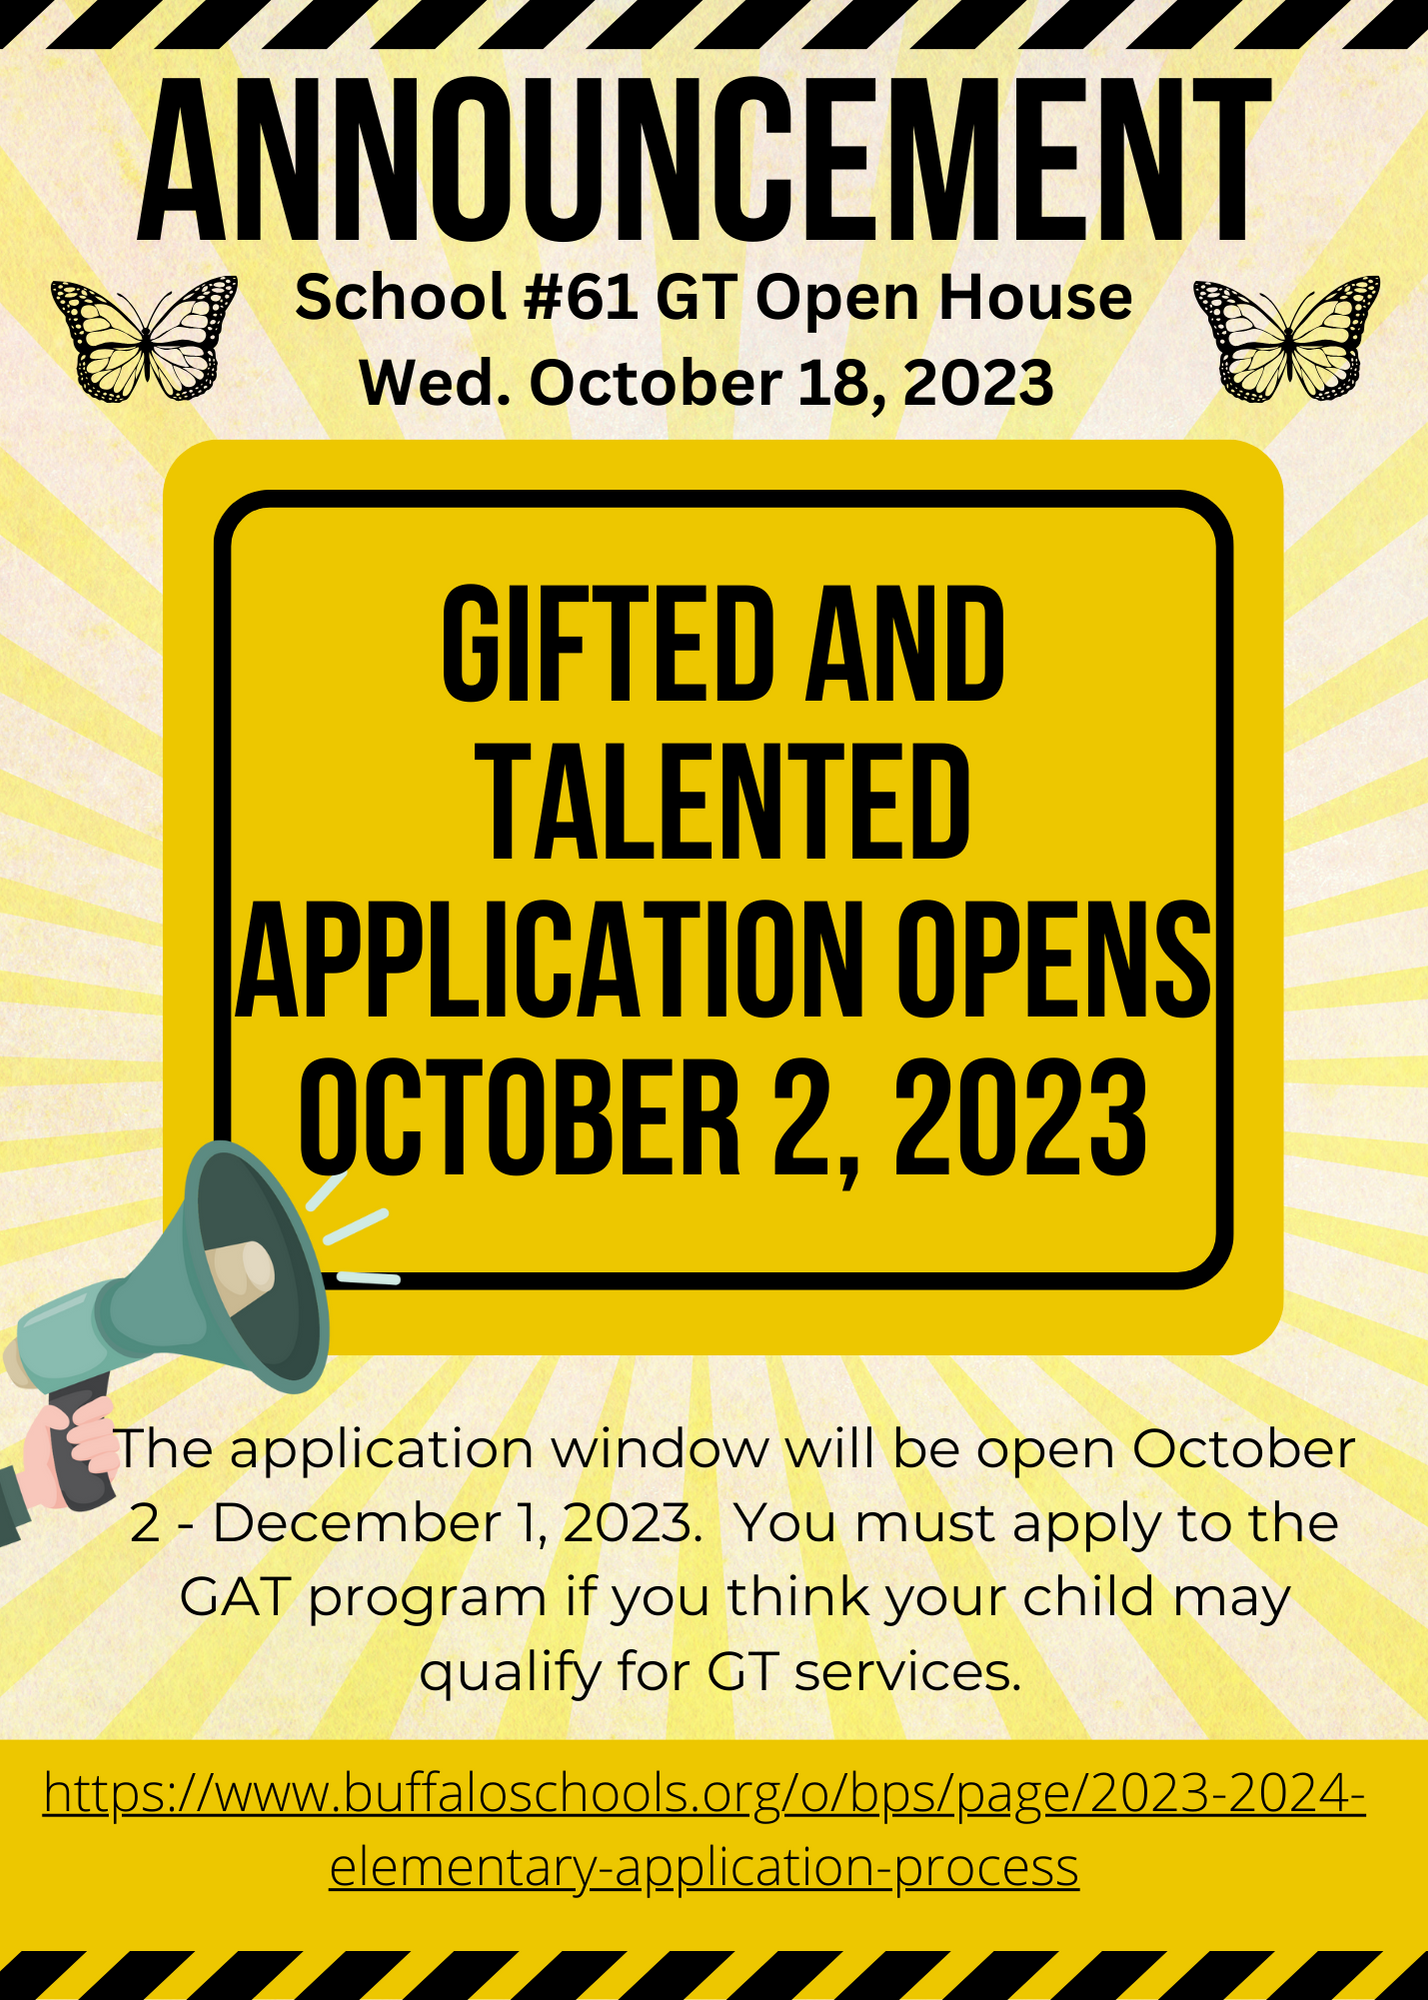 School #61 GT Open House  Wed. October 18, 2023  GIFTED AND  TALENTED  APPLICATION OPENS  OCTOBER 2, 2023  The application window will be open October  2 - December 1, 2023. You must apply to the  CAT program if you think your child may  qualify for GT services.  bitps://www.buffaIoschooIs.orgmpsLpage/2023-2024-  elementary=application-process 